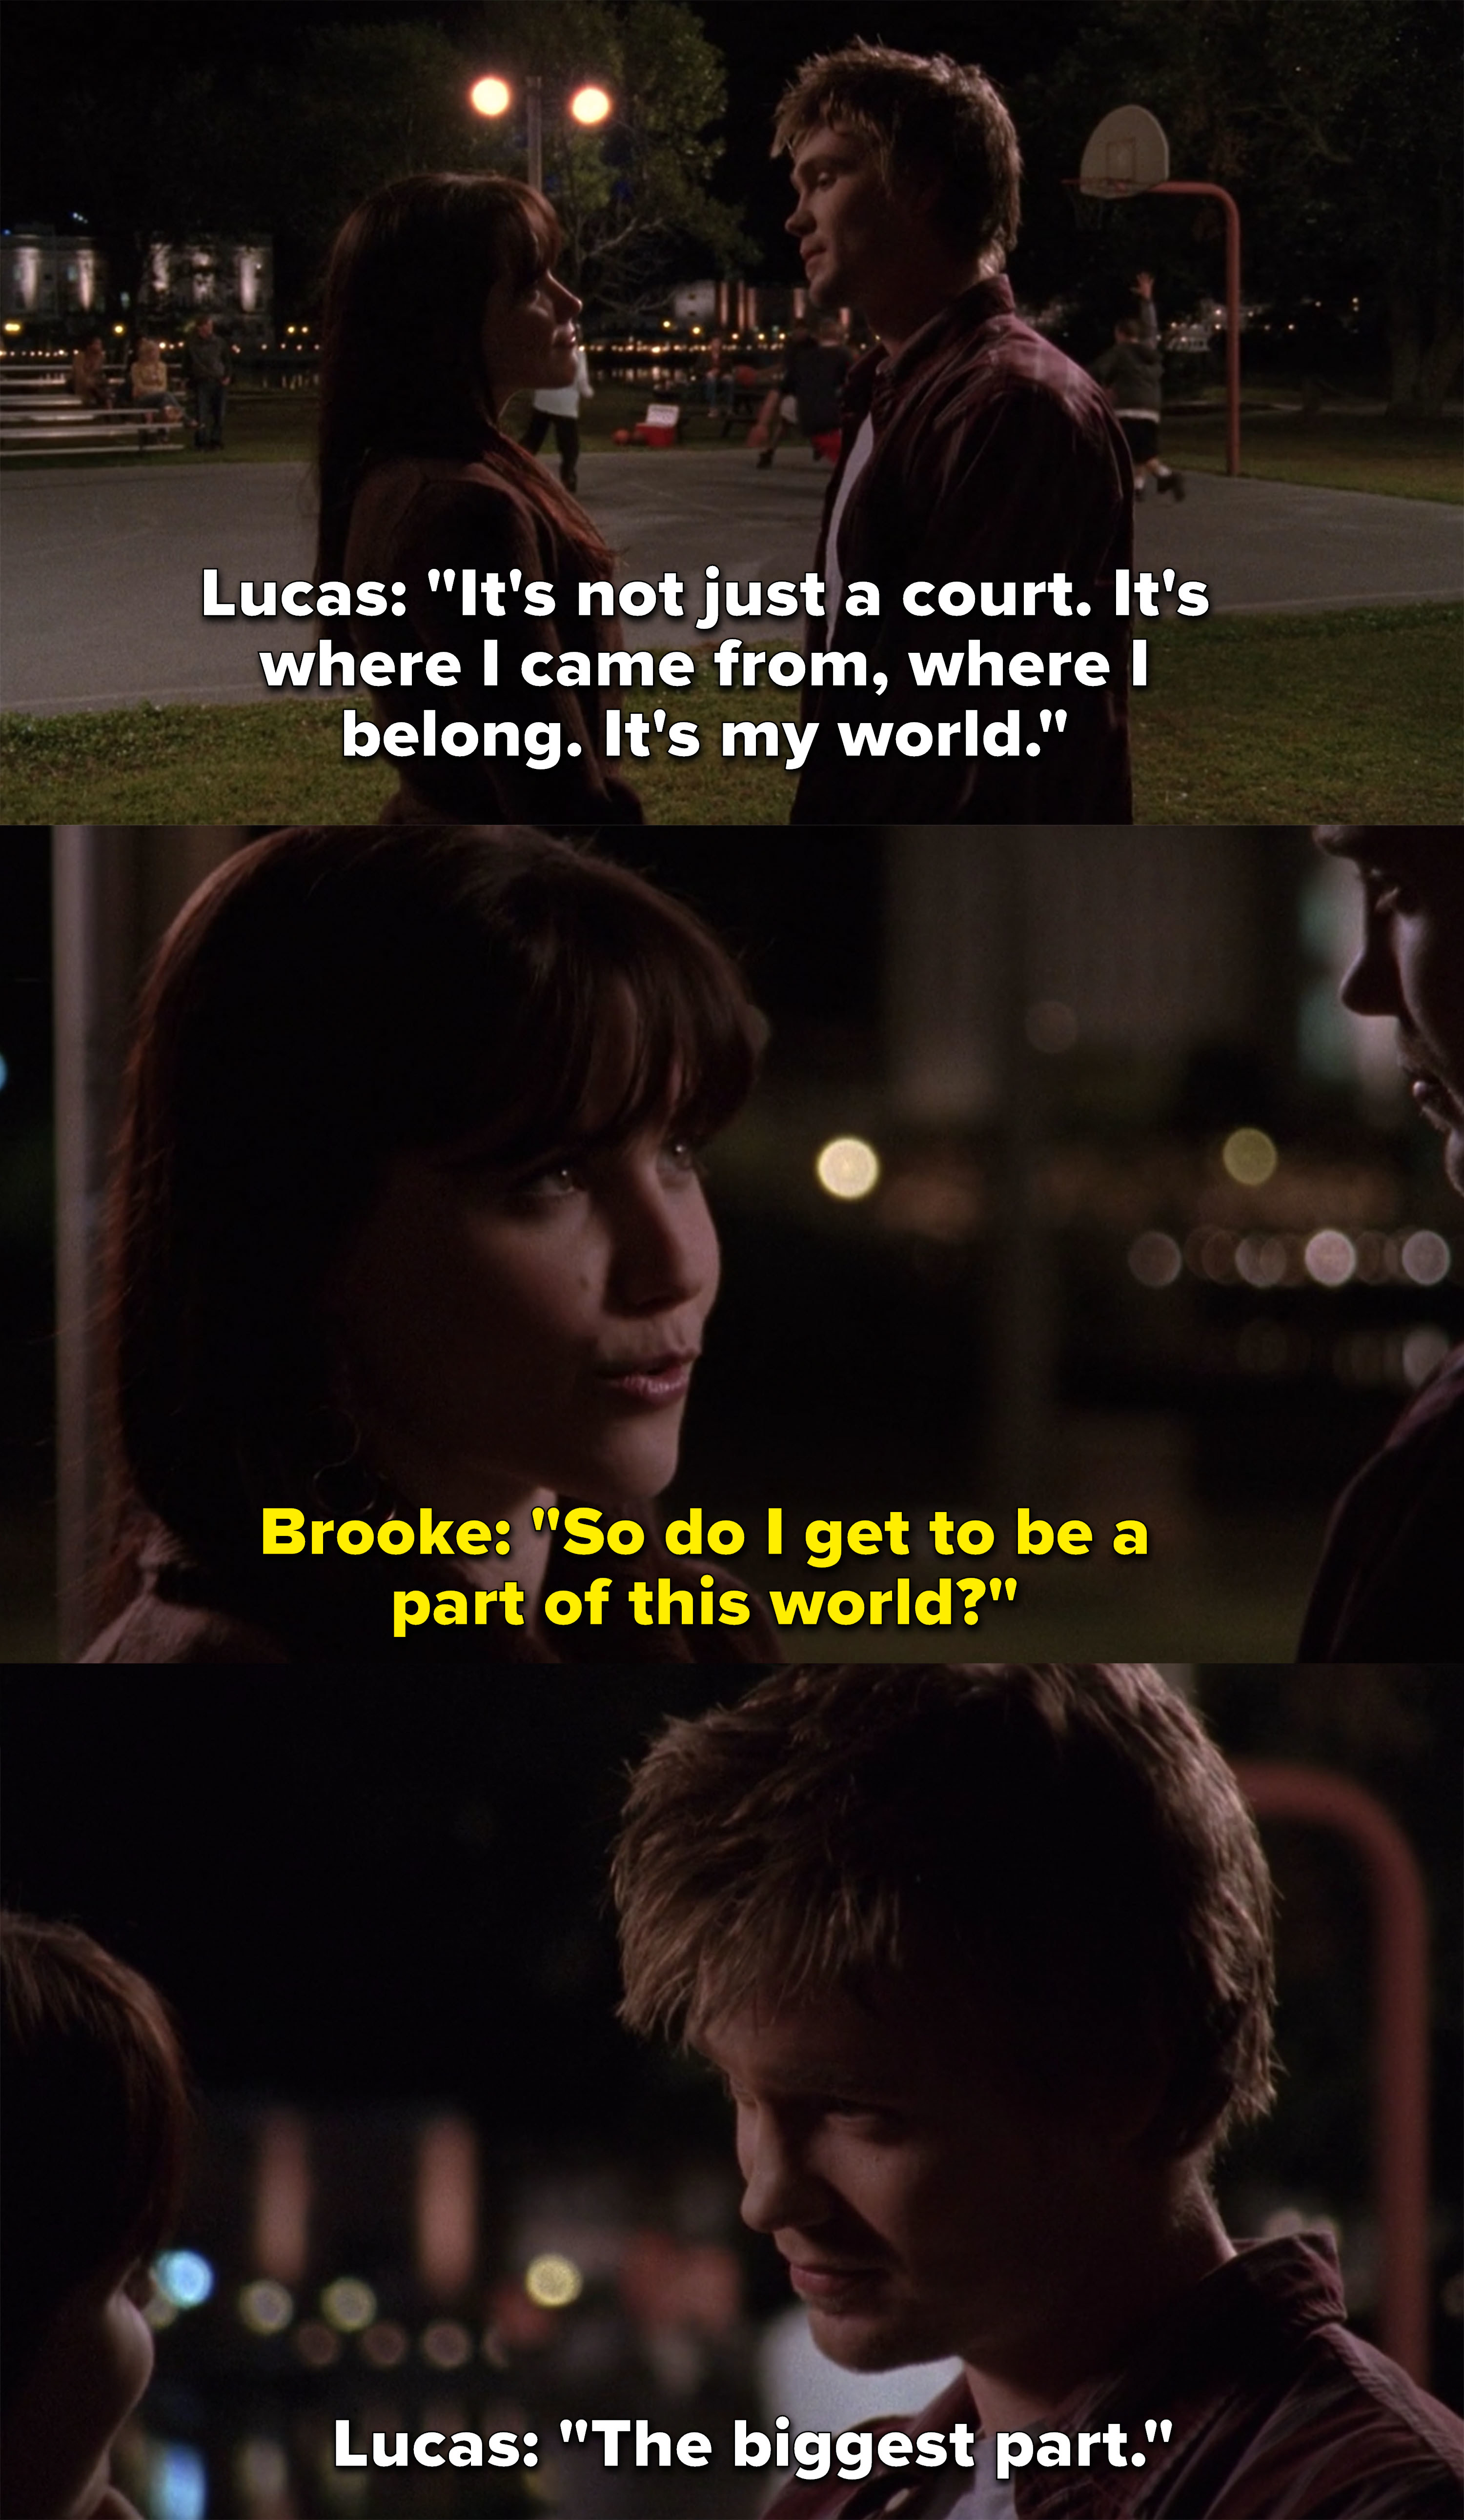 Lucas says the court is his world, Brooke asks if she gets to be a part of this world, and Lucas replies, &quot;The biggest part&quot;